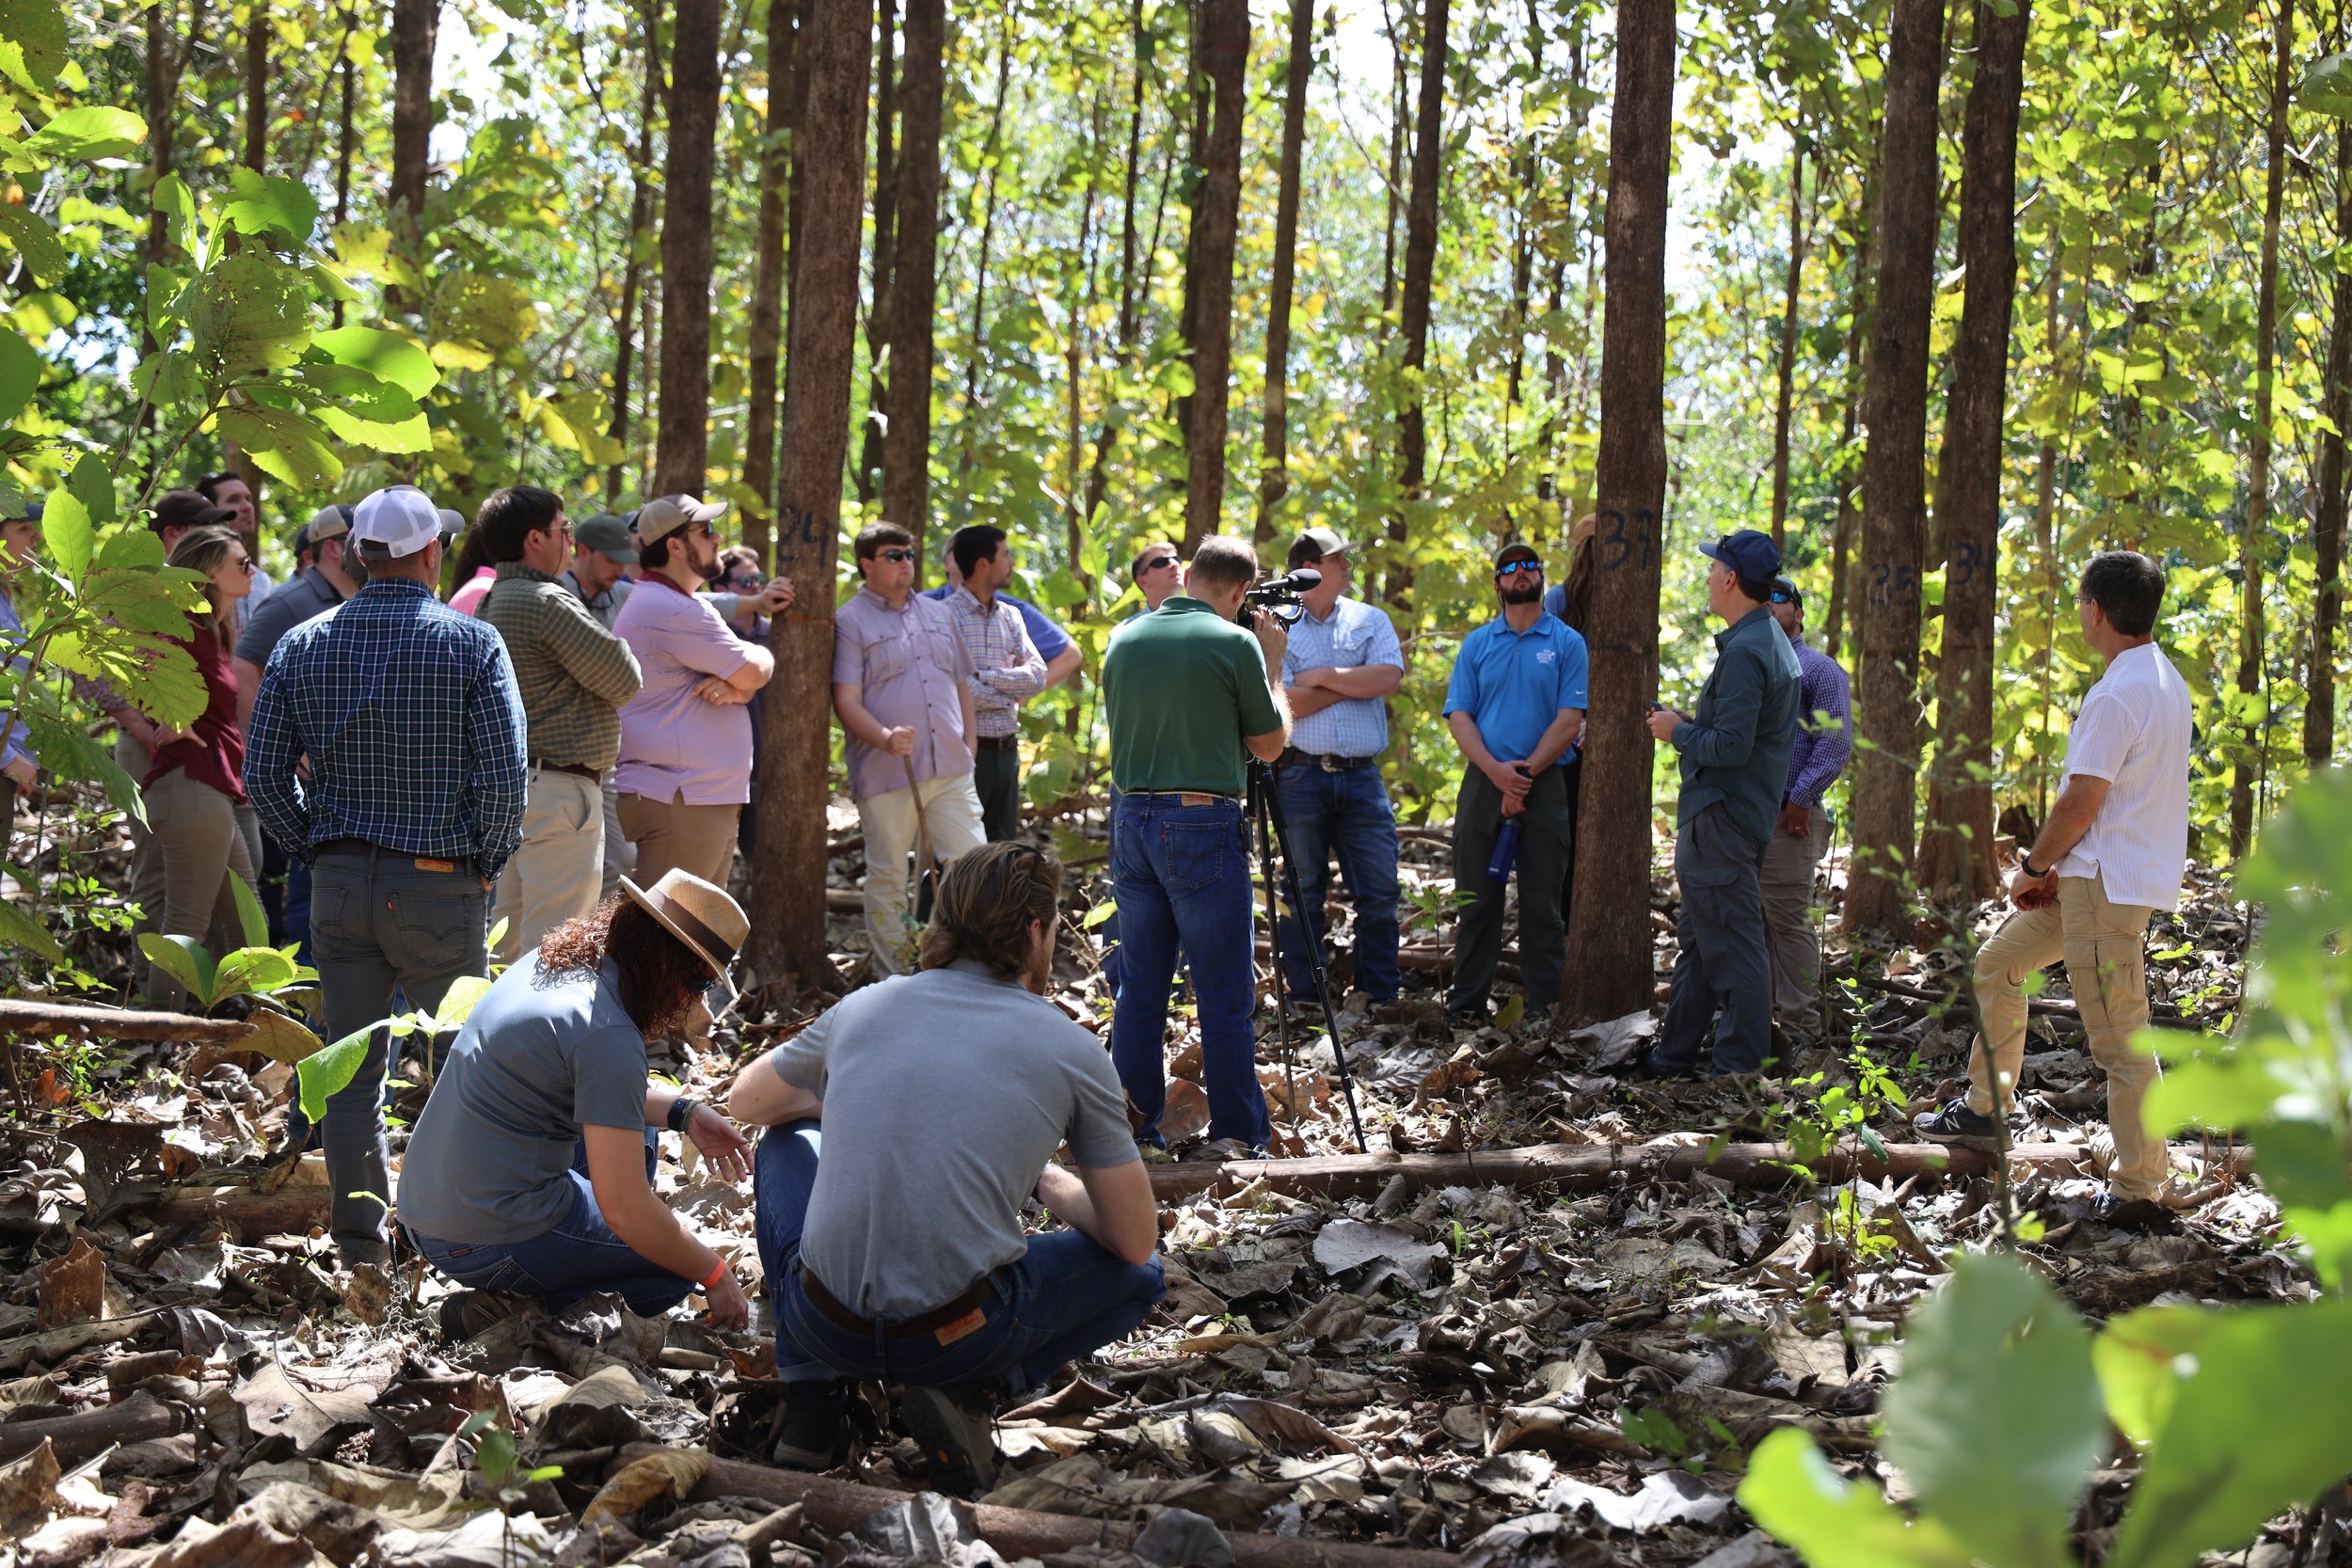  LSU Ag Leadership Class XVII got a tour of a teakwood plantation, led by owner Jeffrey Duda, an American ex-pat who saw an opportunity in Panama.&nbsp; The 2,000 acres here represent a tiny fraction of the teakwood business, but they told the class 